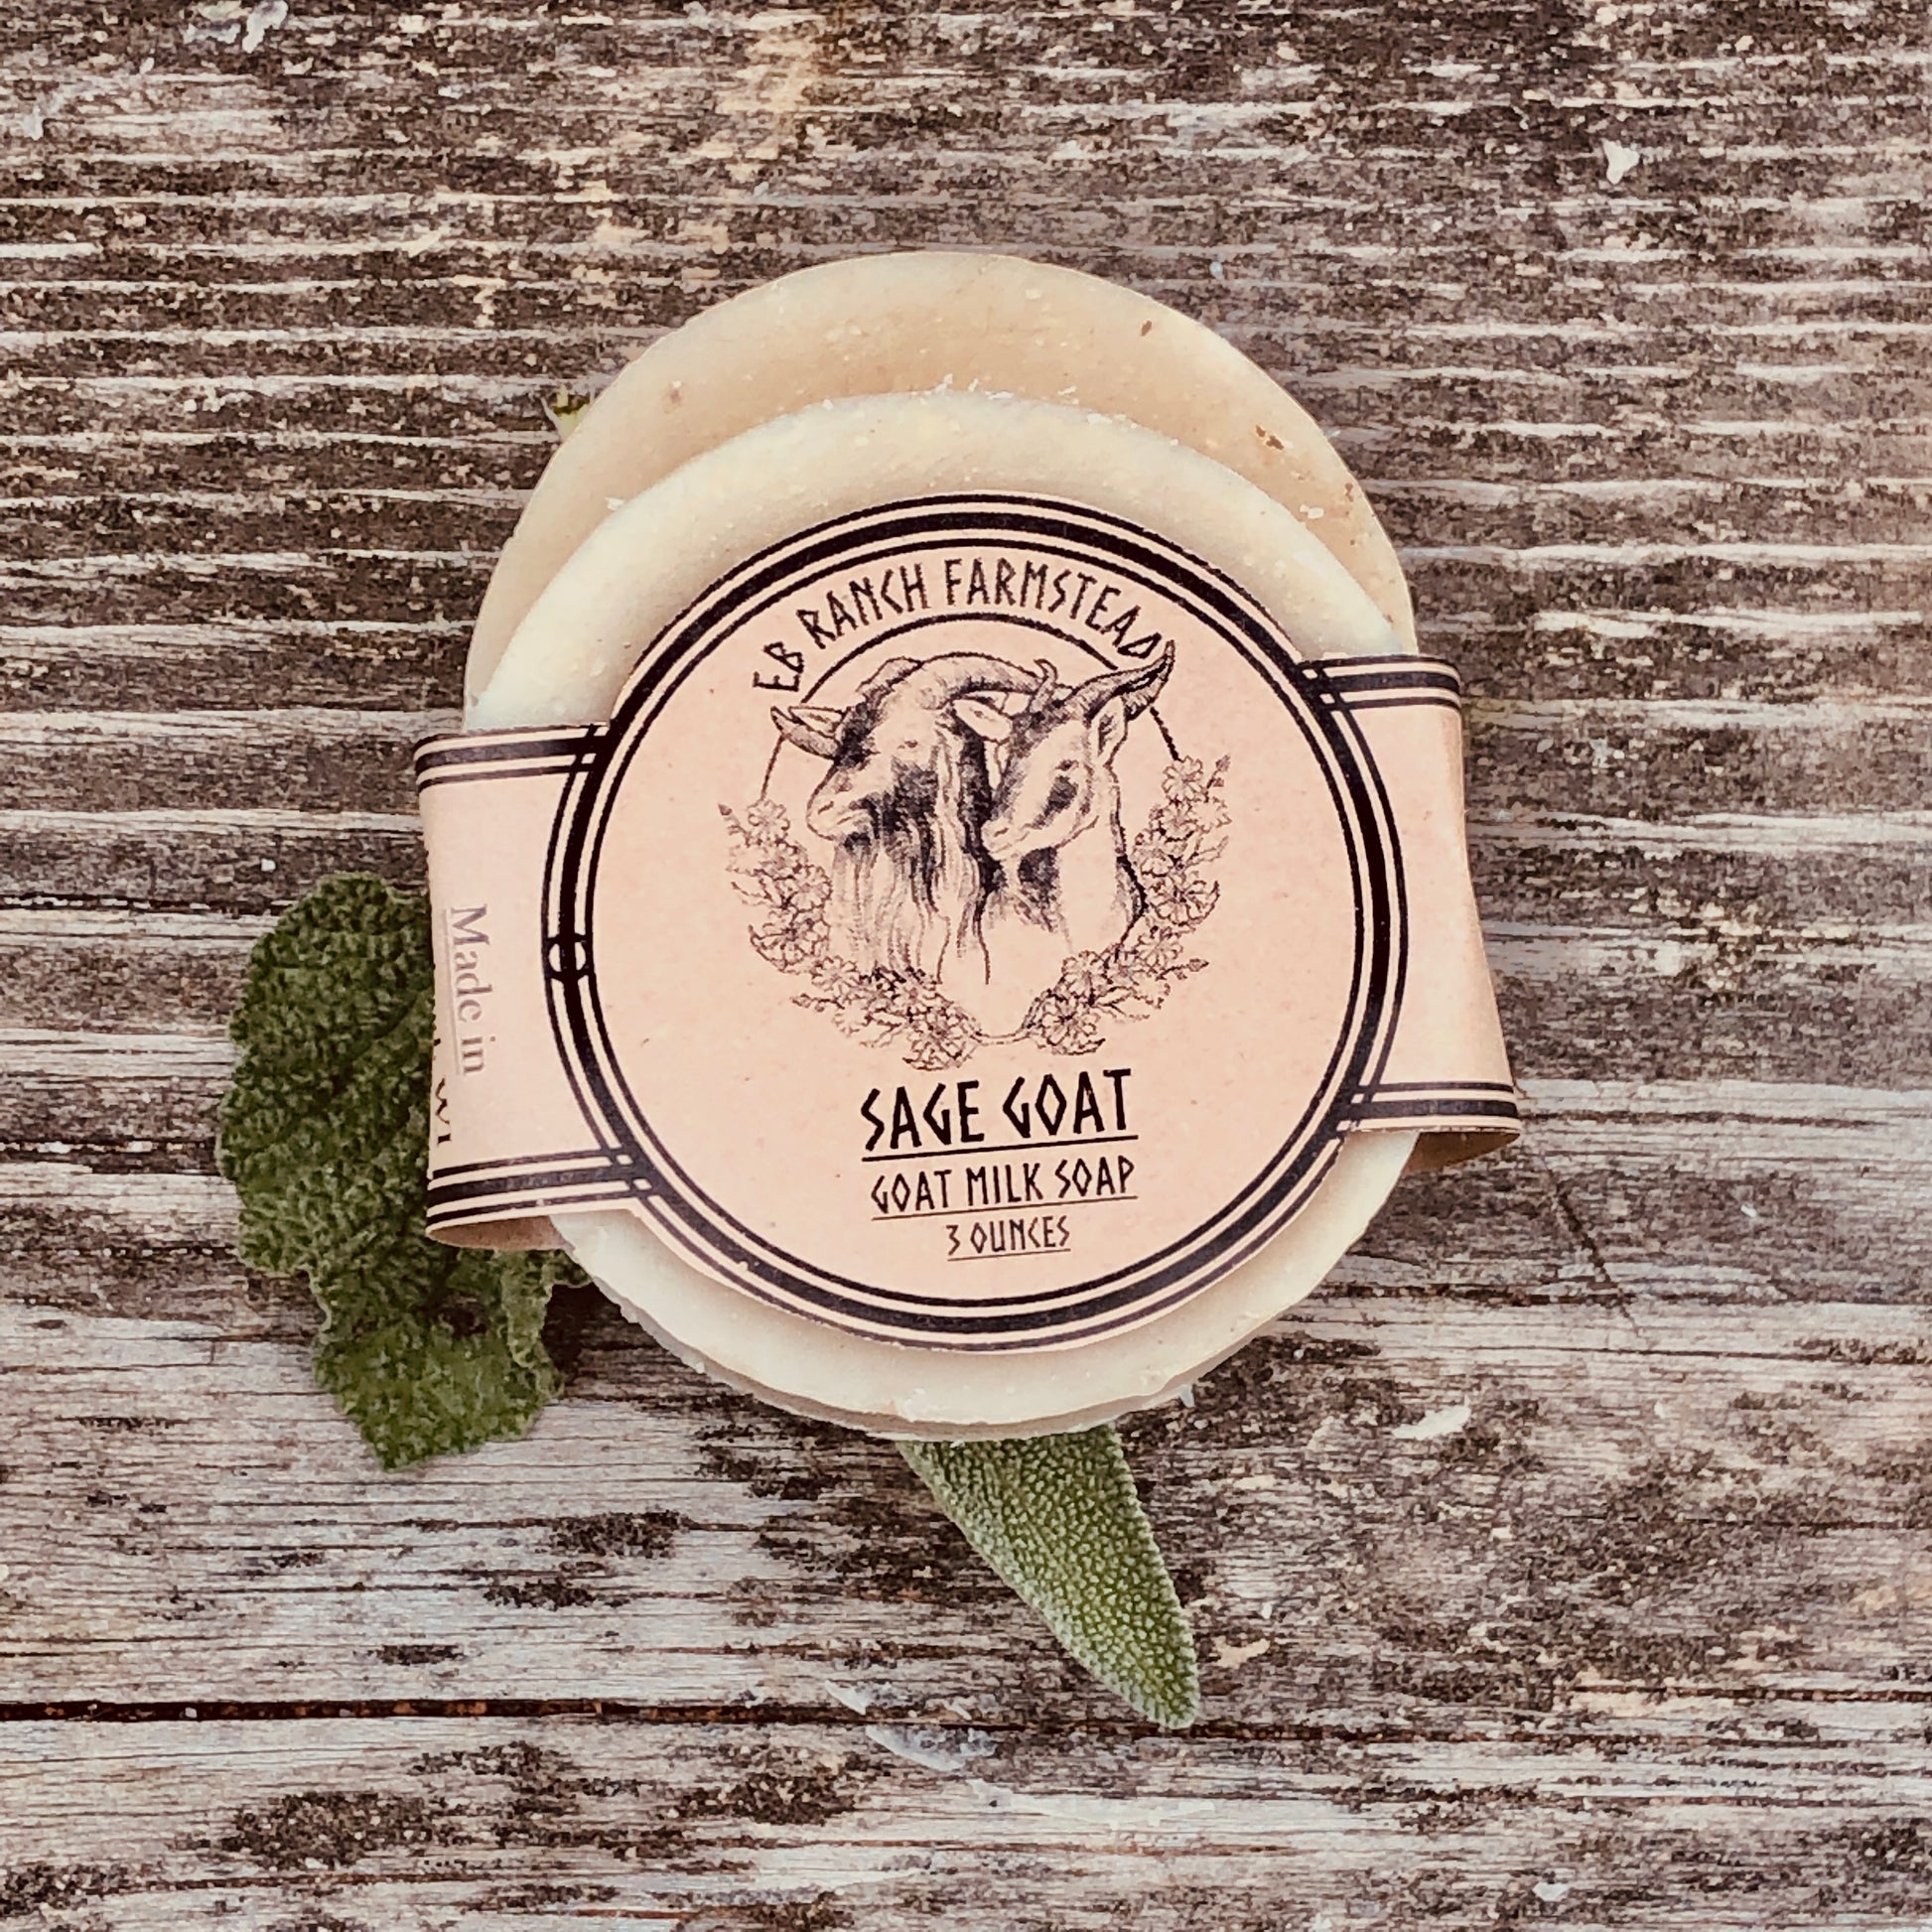 Bar of Wild Haven Farm's Sage Goat goat milk soap made with San Clemente Island goat milk